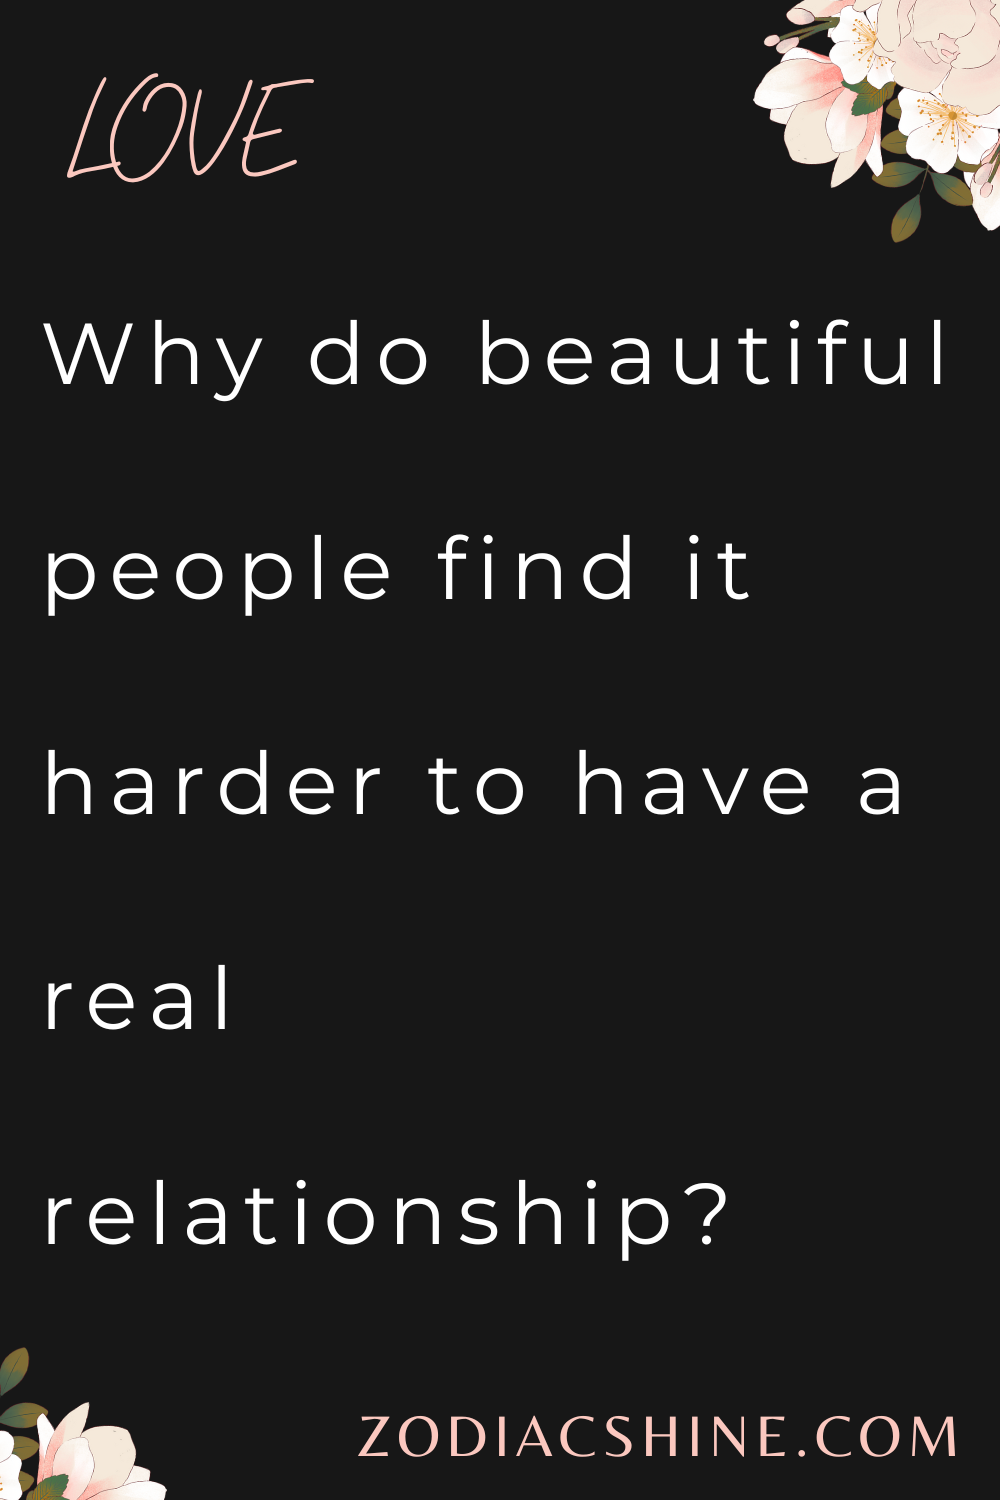 Why do beautiful people find it harder to have a real relationship?